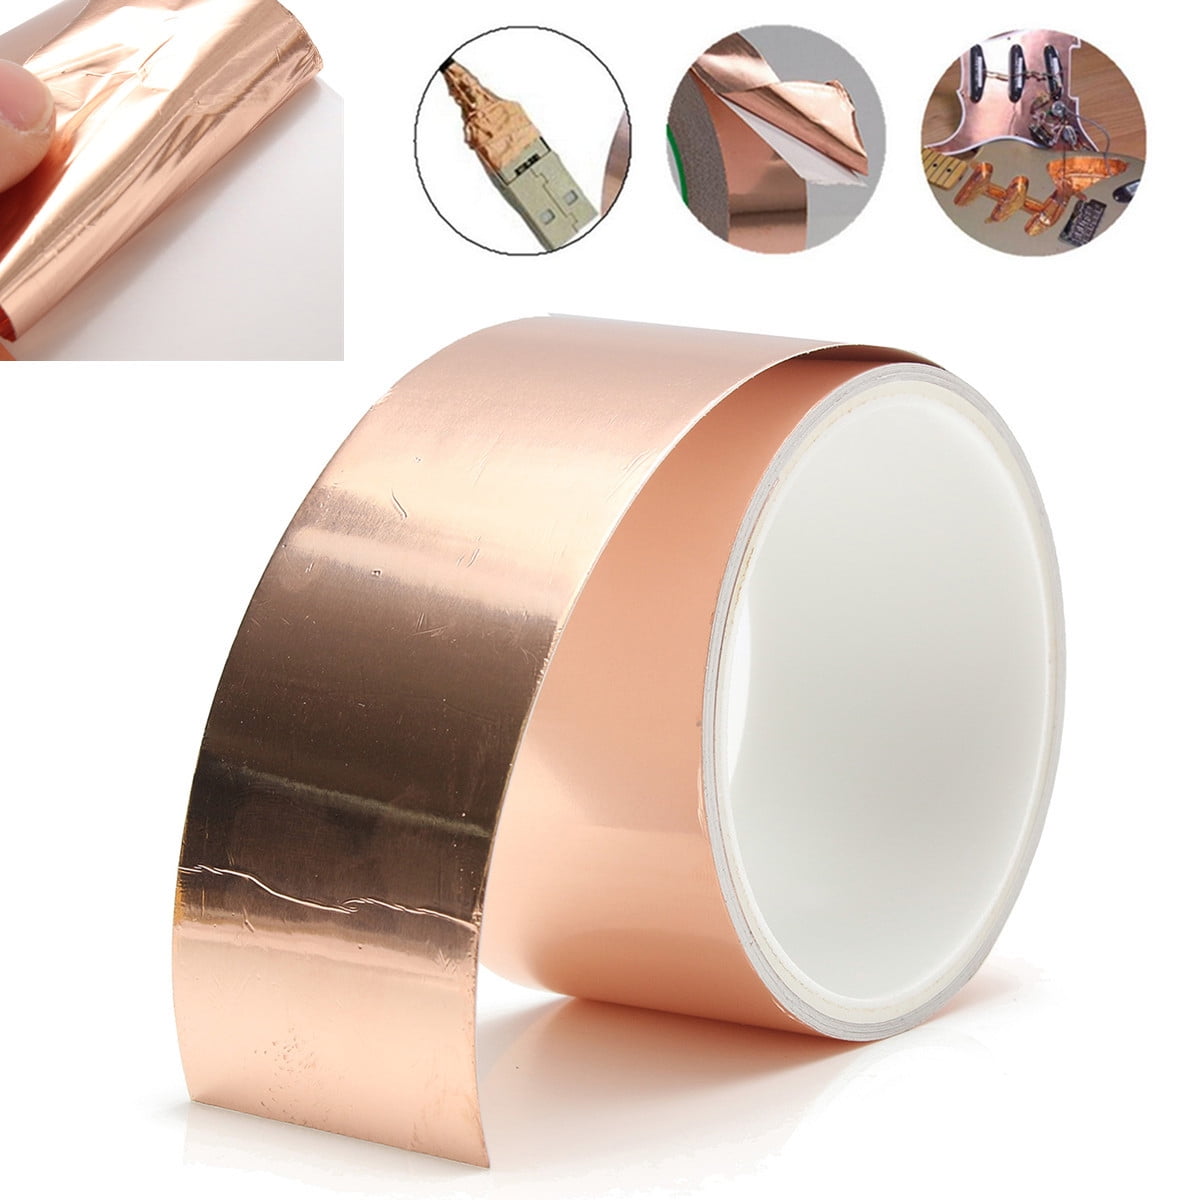 1/2IN*36YD EMI Copper Foil Shielding Tape Conductive Self Adhesive Barrier 1Roll 